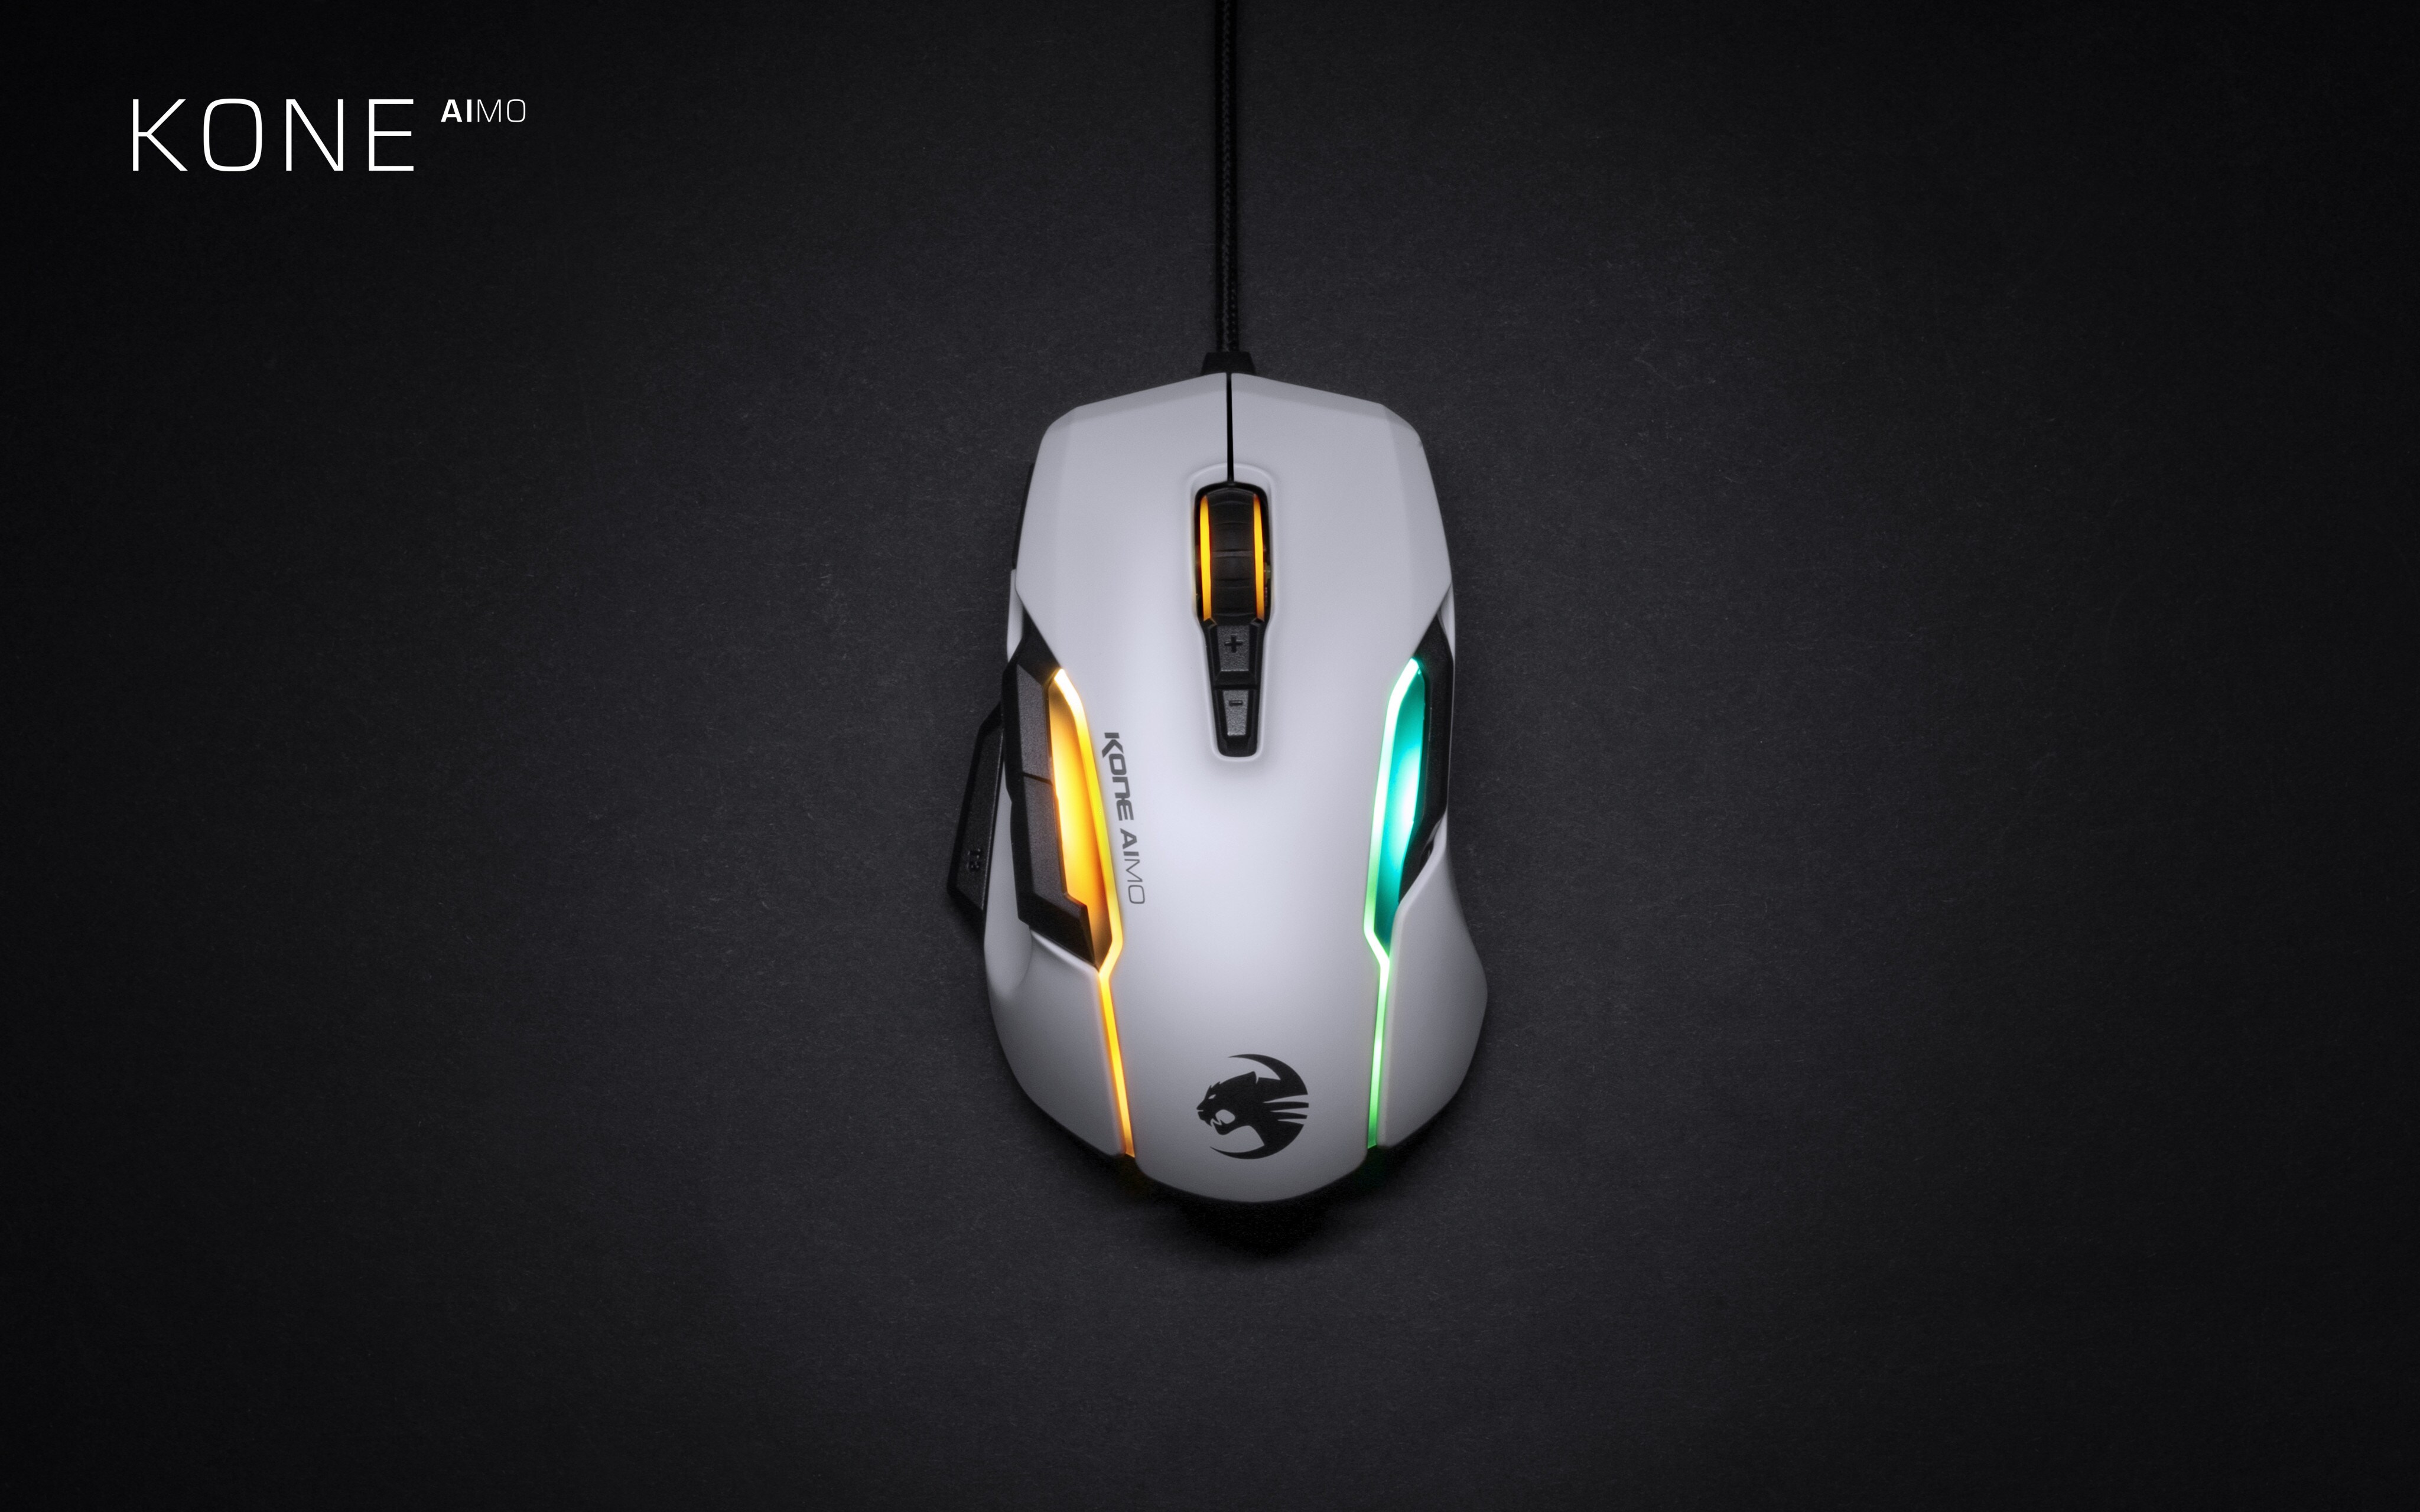 ROCCAT Kone AIMO remastered Gaming weiss ++ Cyberport Maus